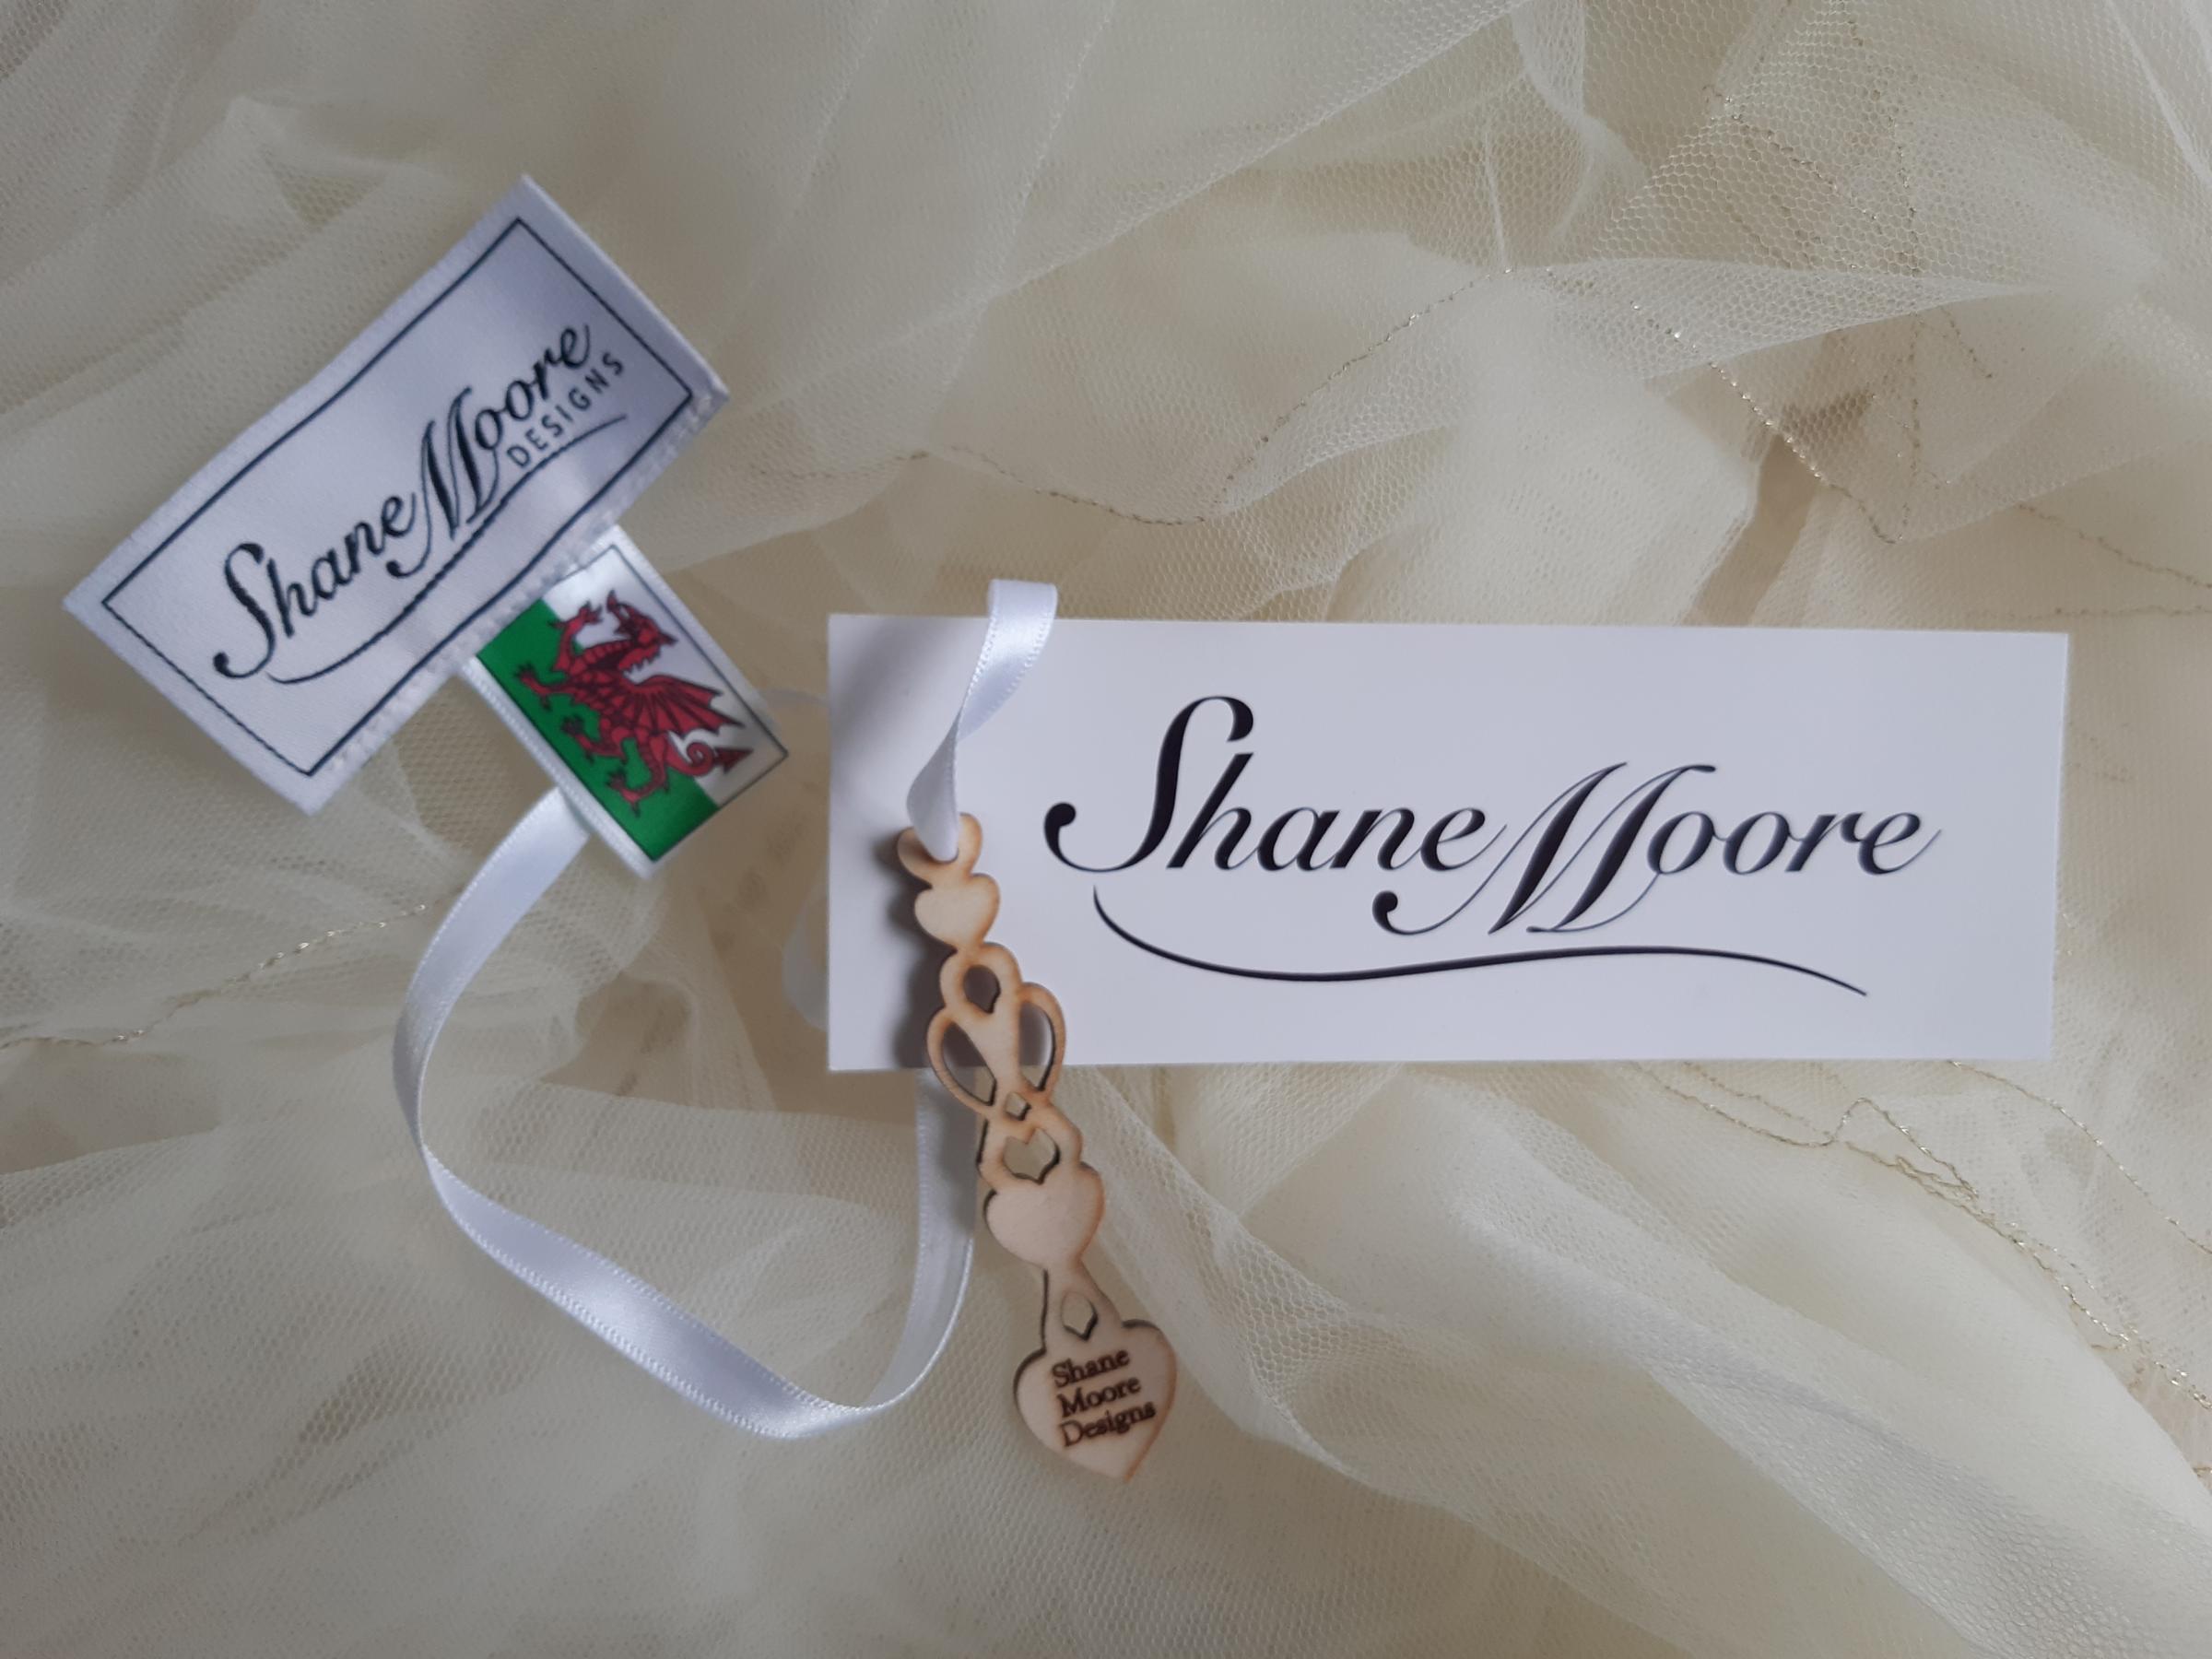 The love spoon and Welsh flag Shane Moore Designs label added to each wedding dress.